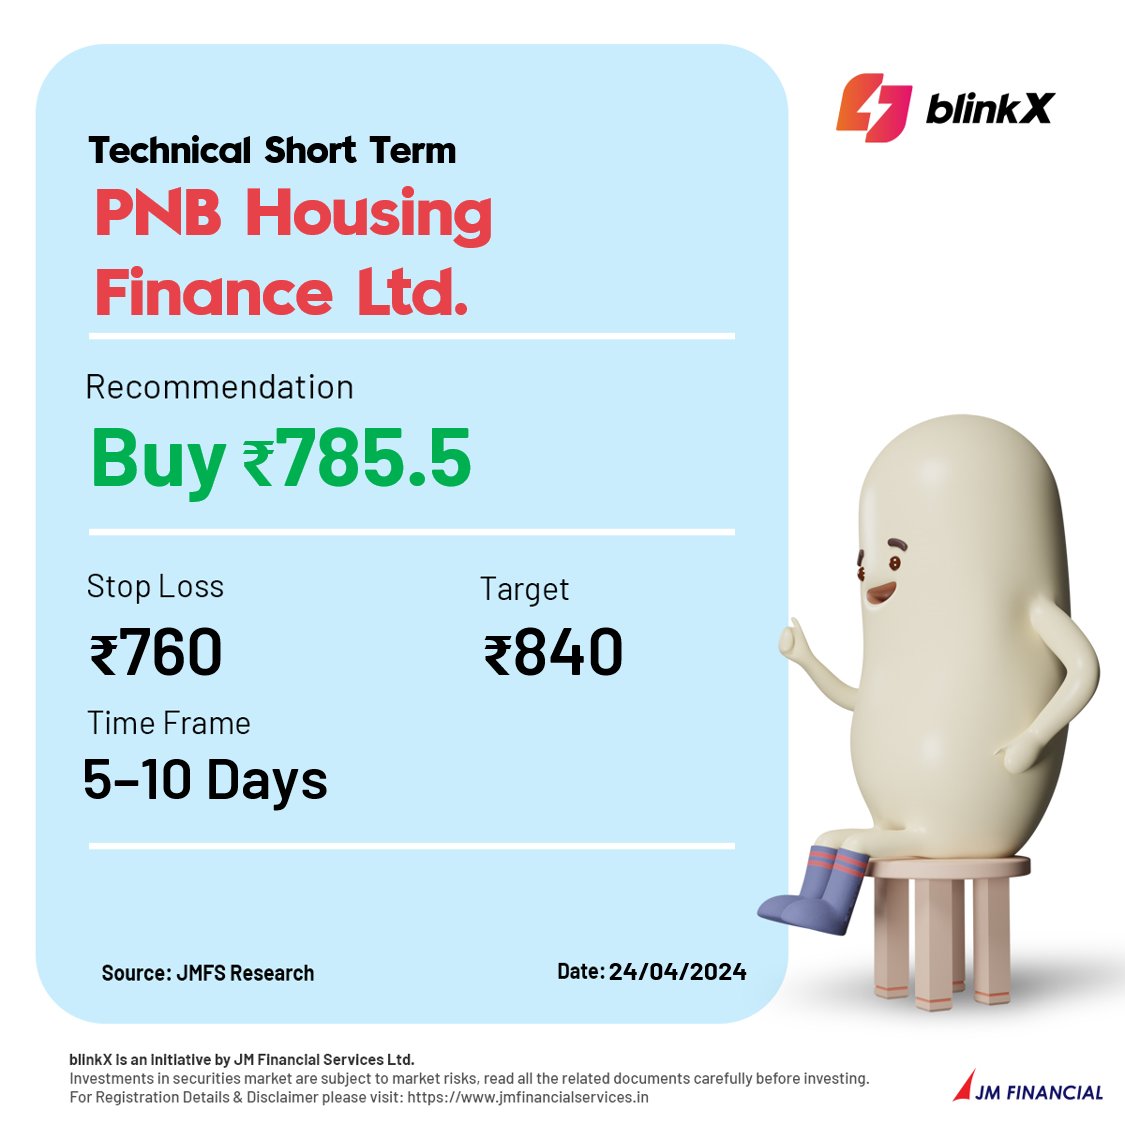 Technical Short Term

BUY – PNB Housing Finance Ltd.

Get the app now! Tap the link in the bio.

#PNB #PNBHOUSING #housingfinance #PNBHousingFinance #nse #bse #nifty50 #trading #intradaytrading #stockmarketindia #markets #stockmarket #investor #investments #finance #research…